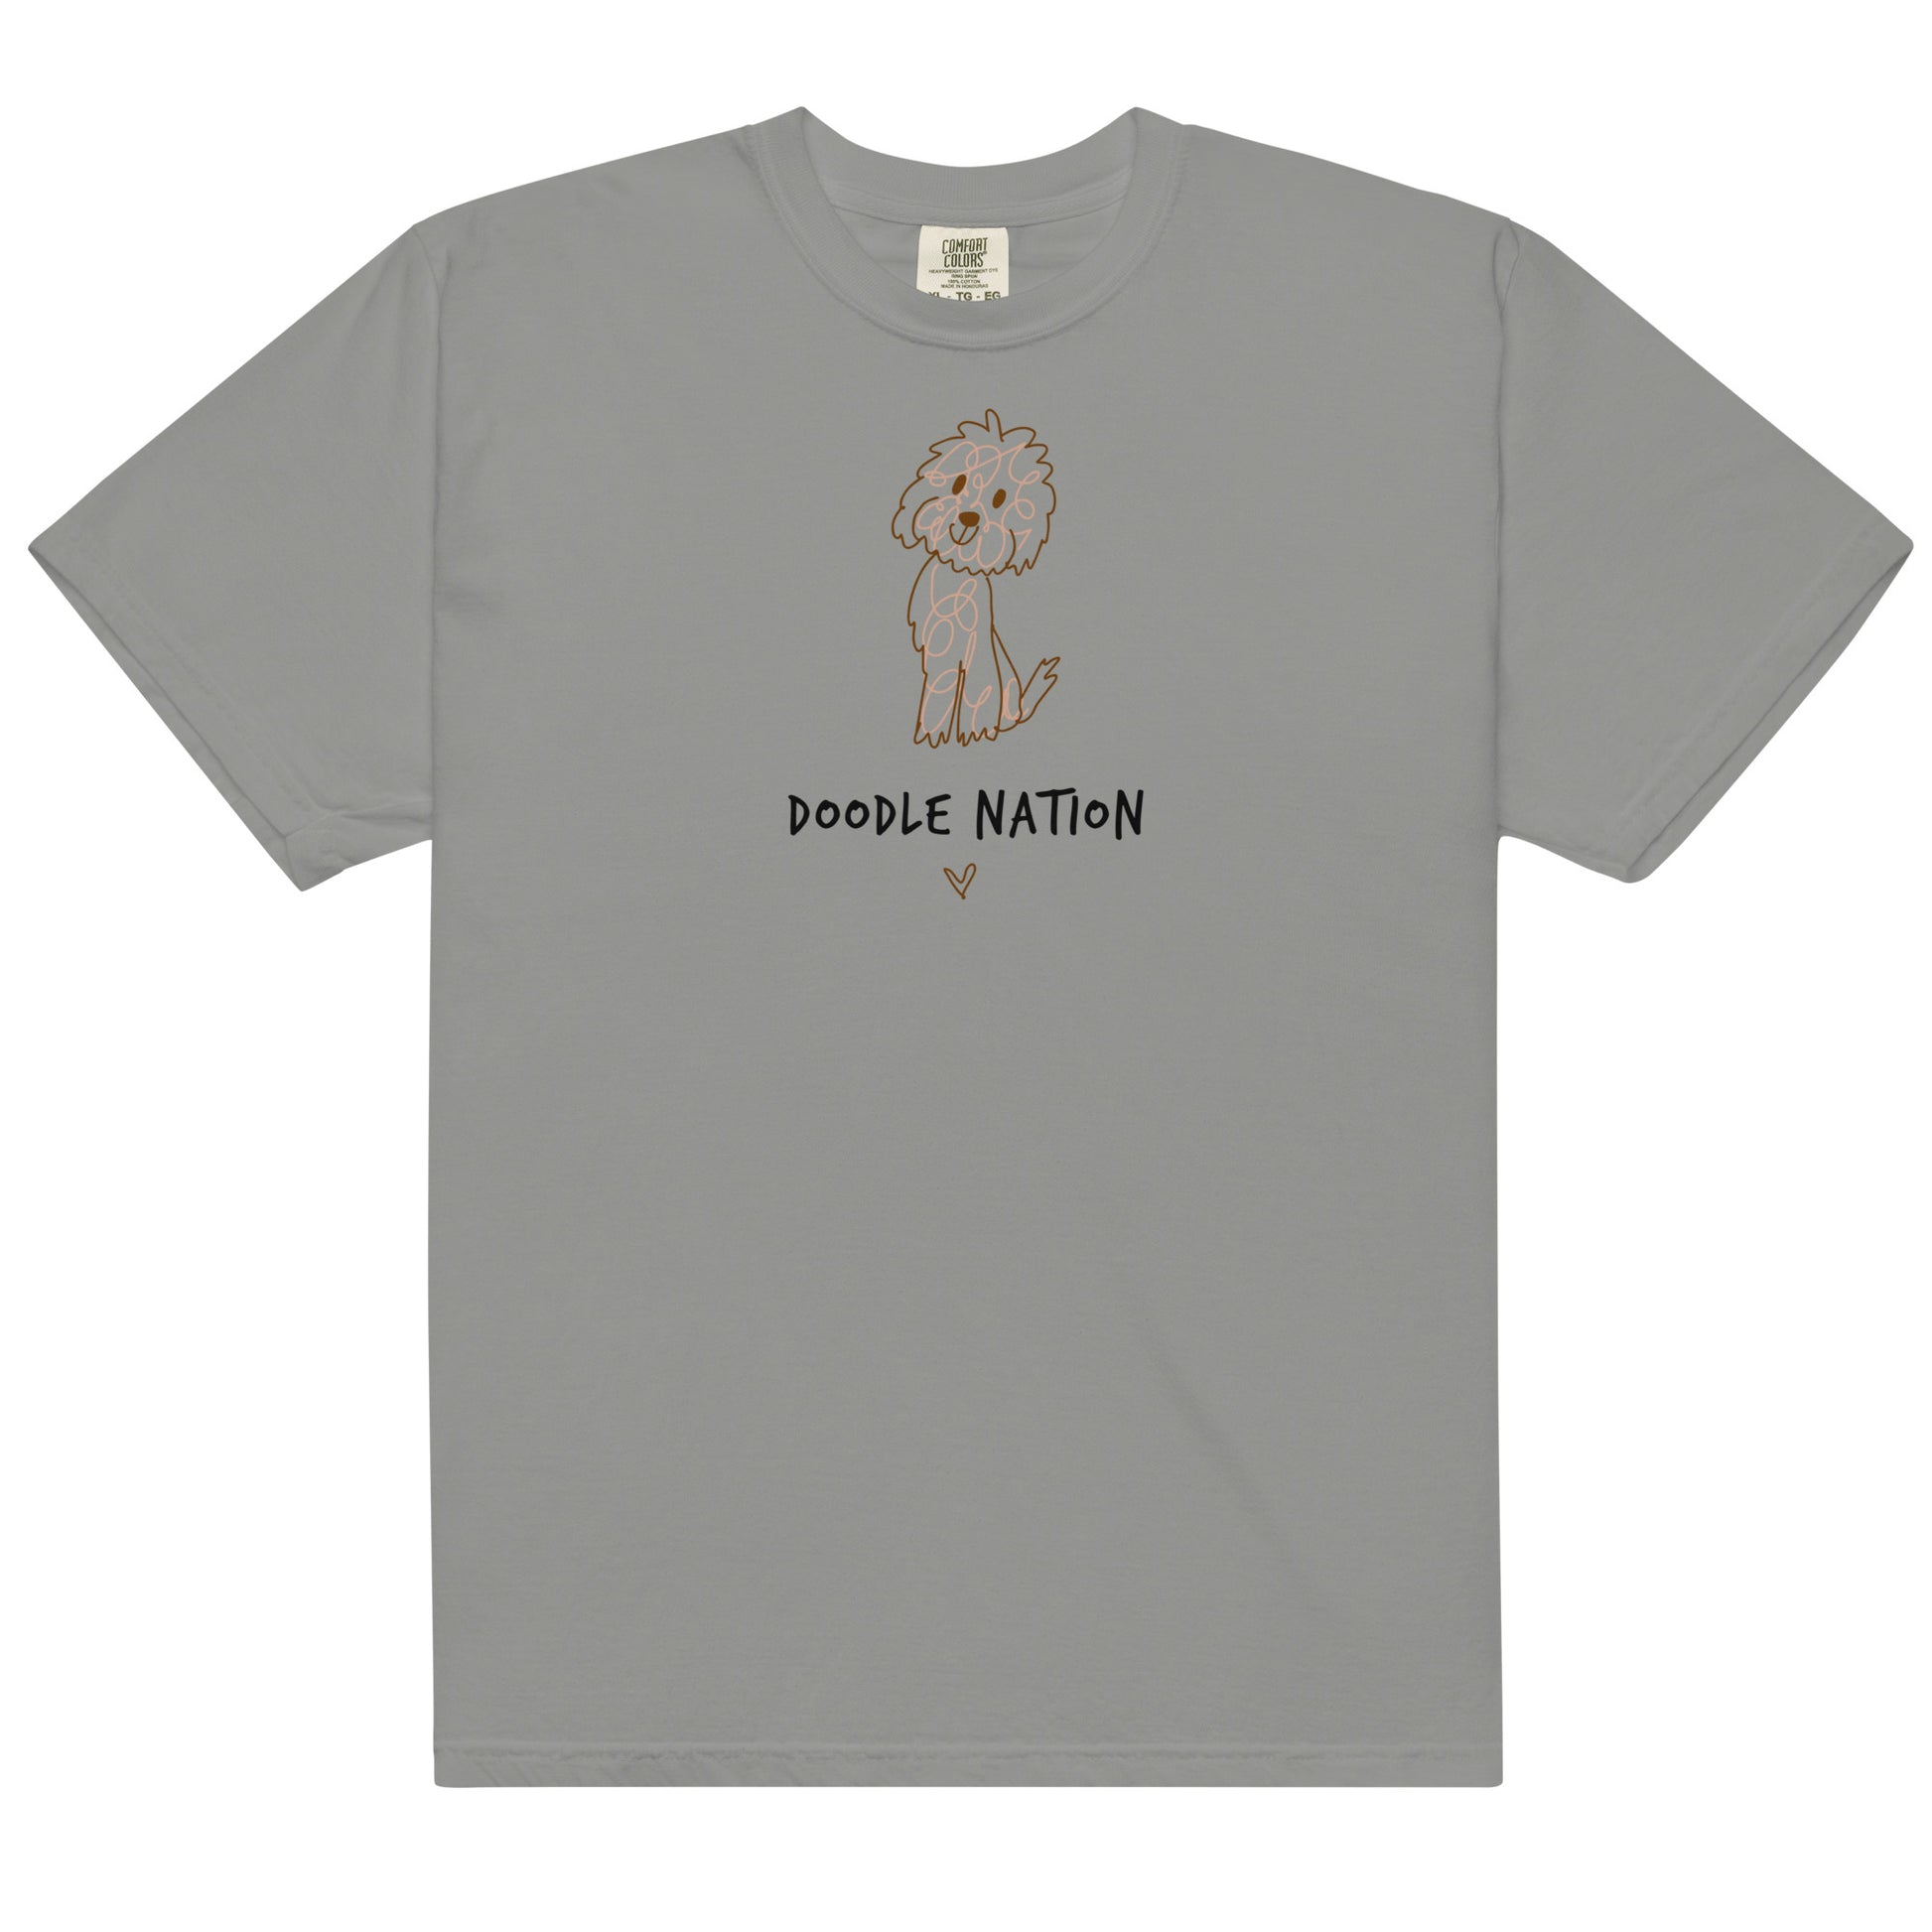 Grey comfort color t-shirt with hand drawn dog design and saying Doodle Nation